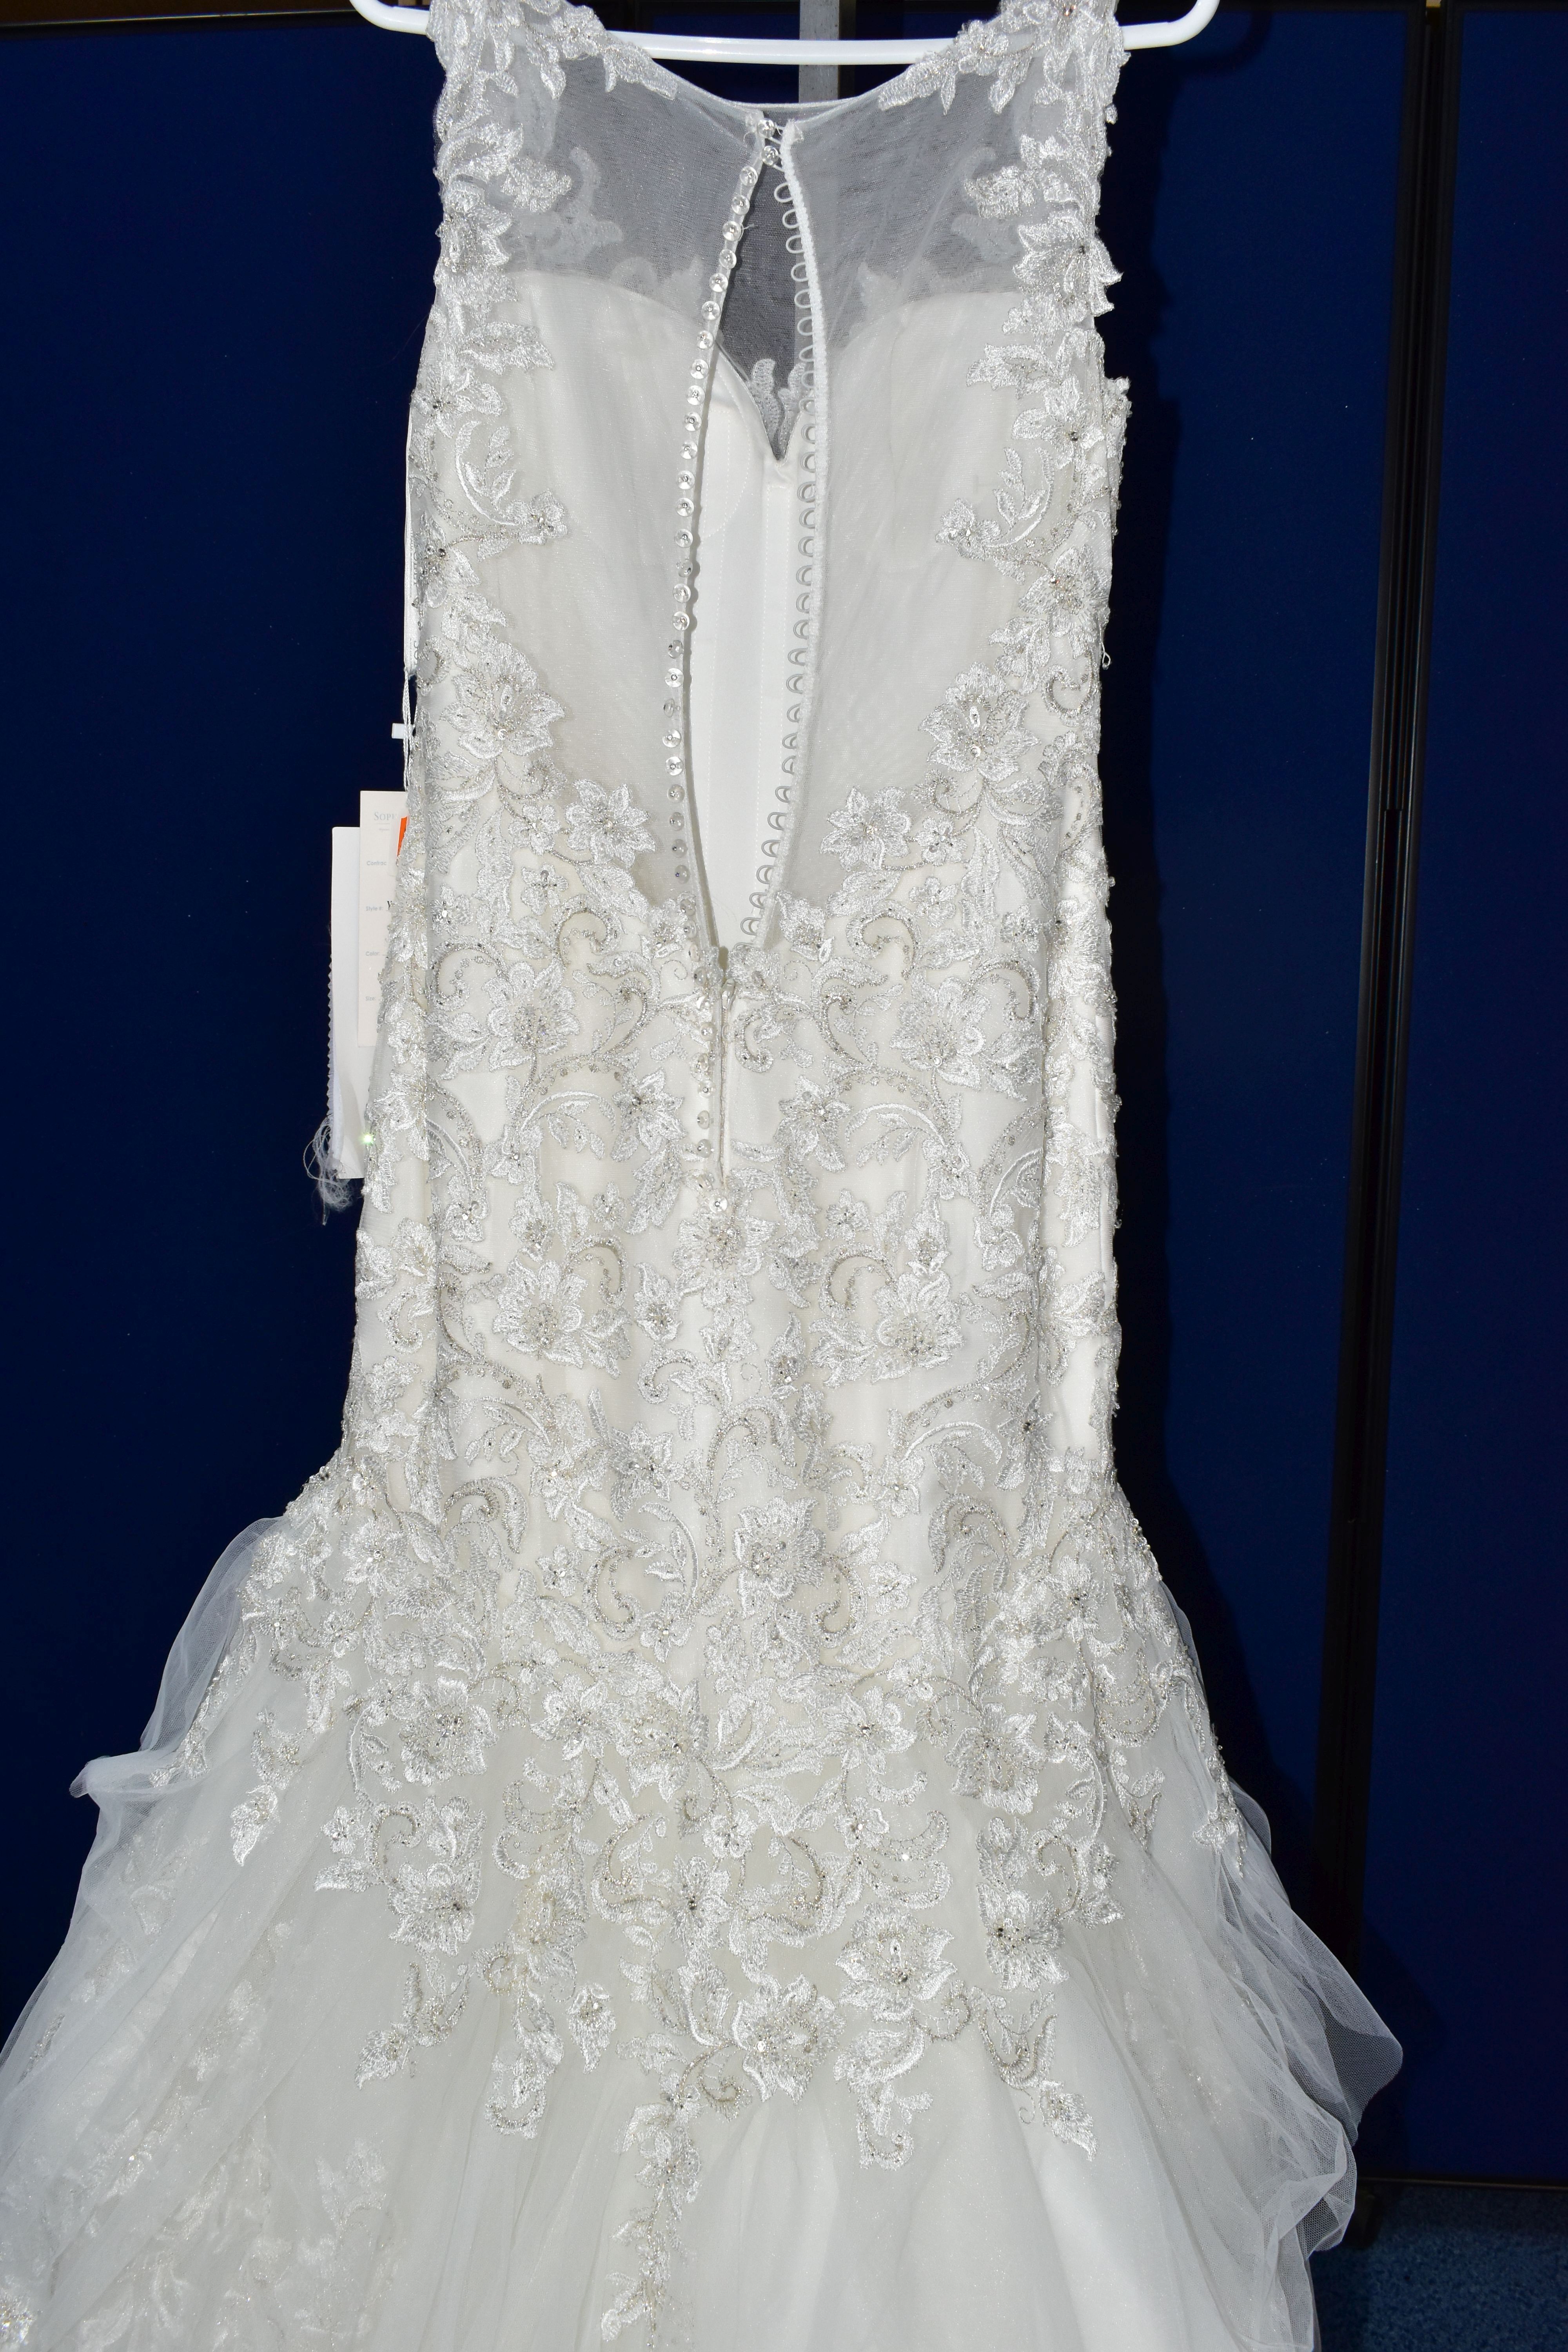 WEDDING DRESS, 'Sophia Tolli', ivory, size 6, beaded appliques, button detail along back, dropped - Image 14 of 16